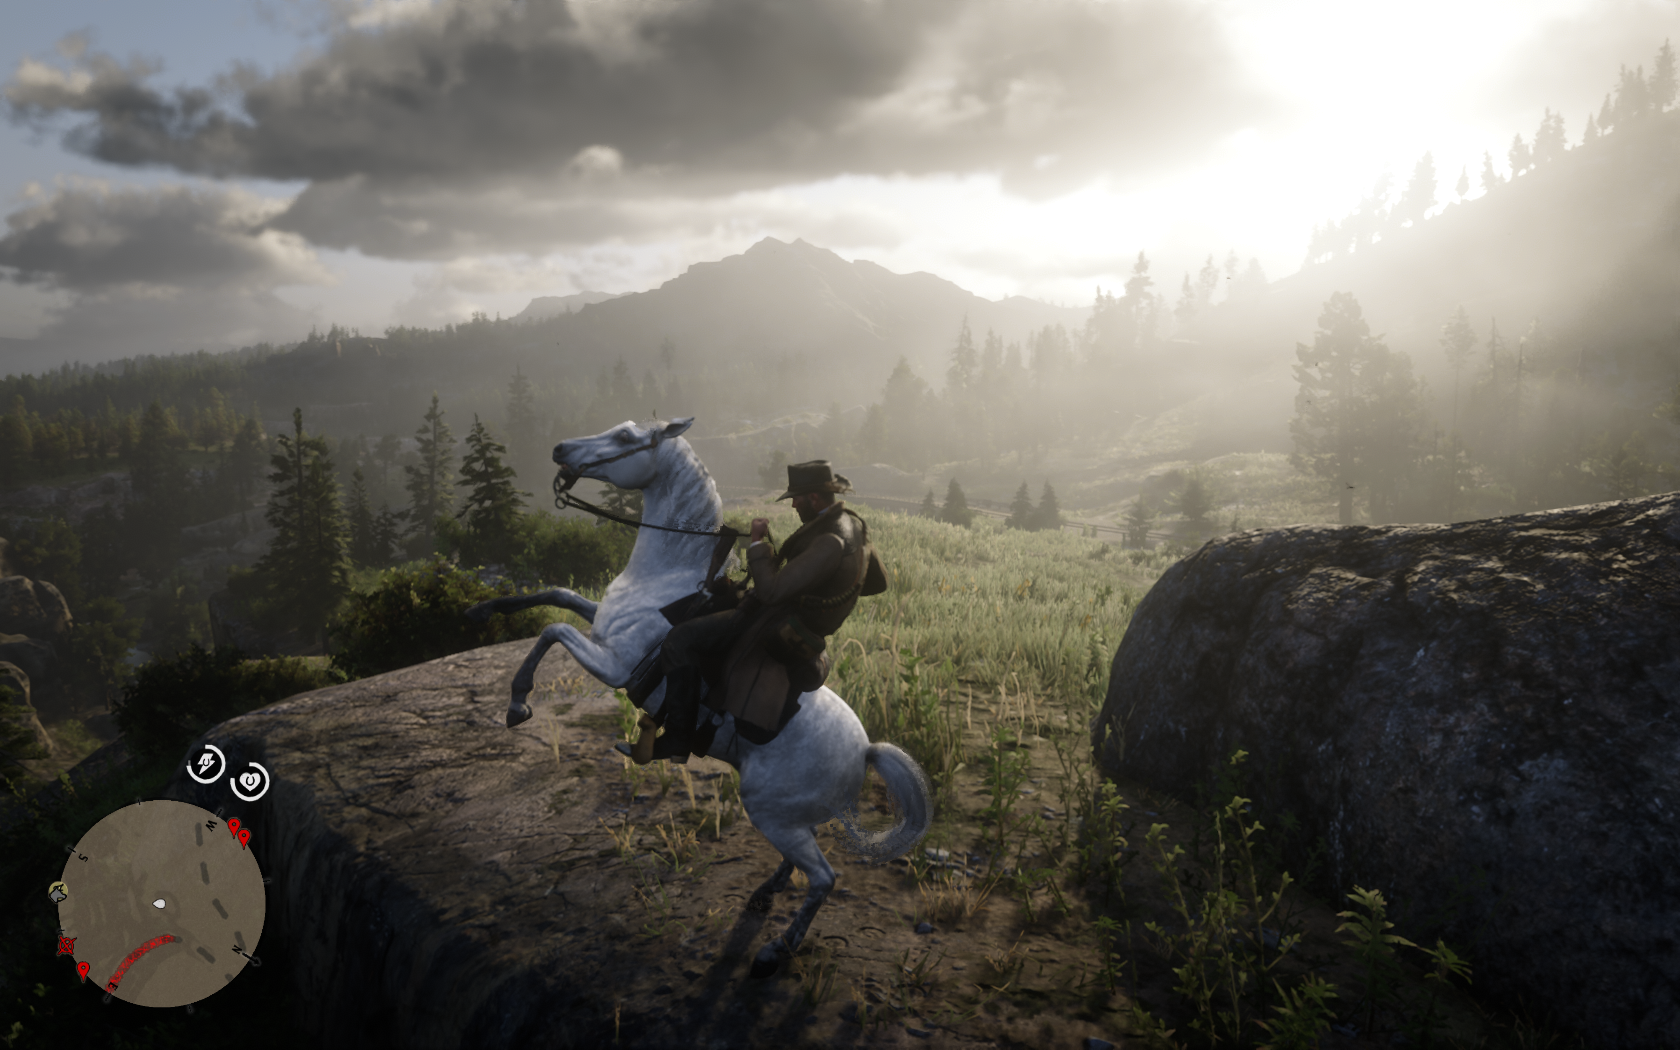 Red Dead Redemption 2 (PC) review: One of the best stories in gaming comes  to PC 